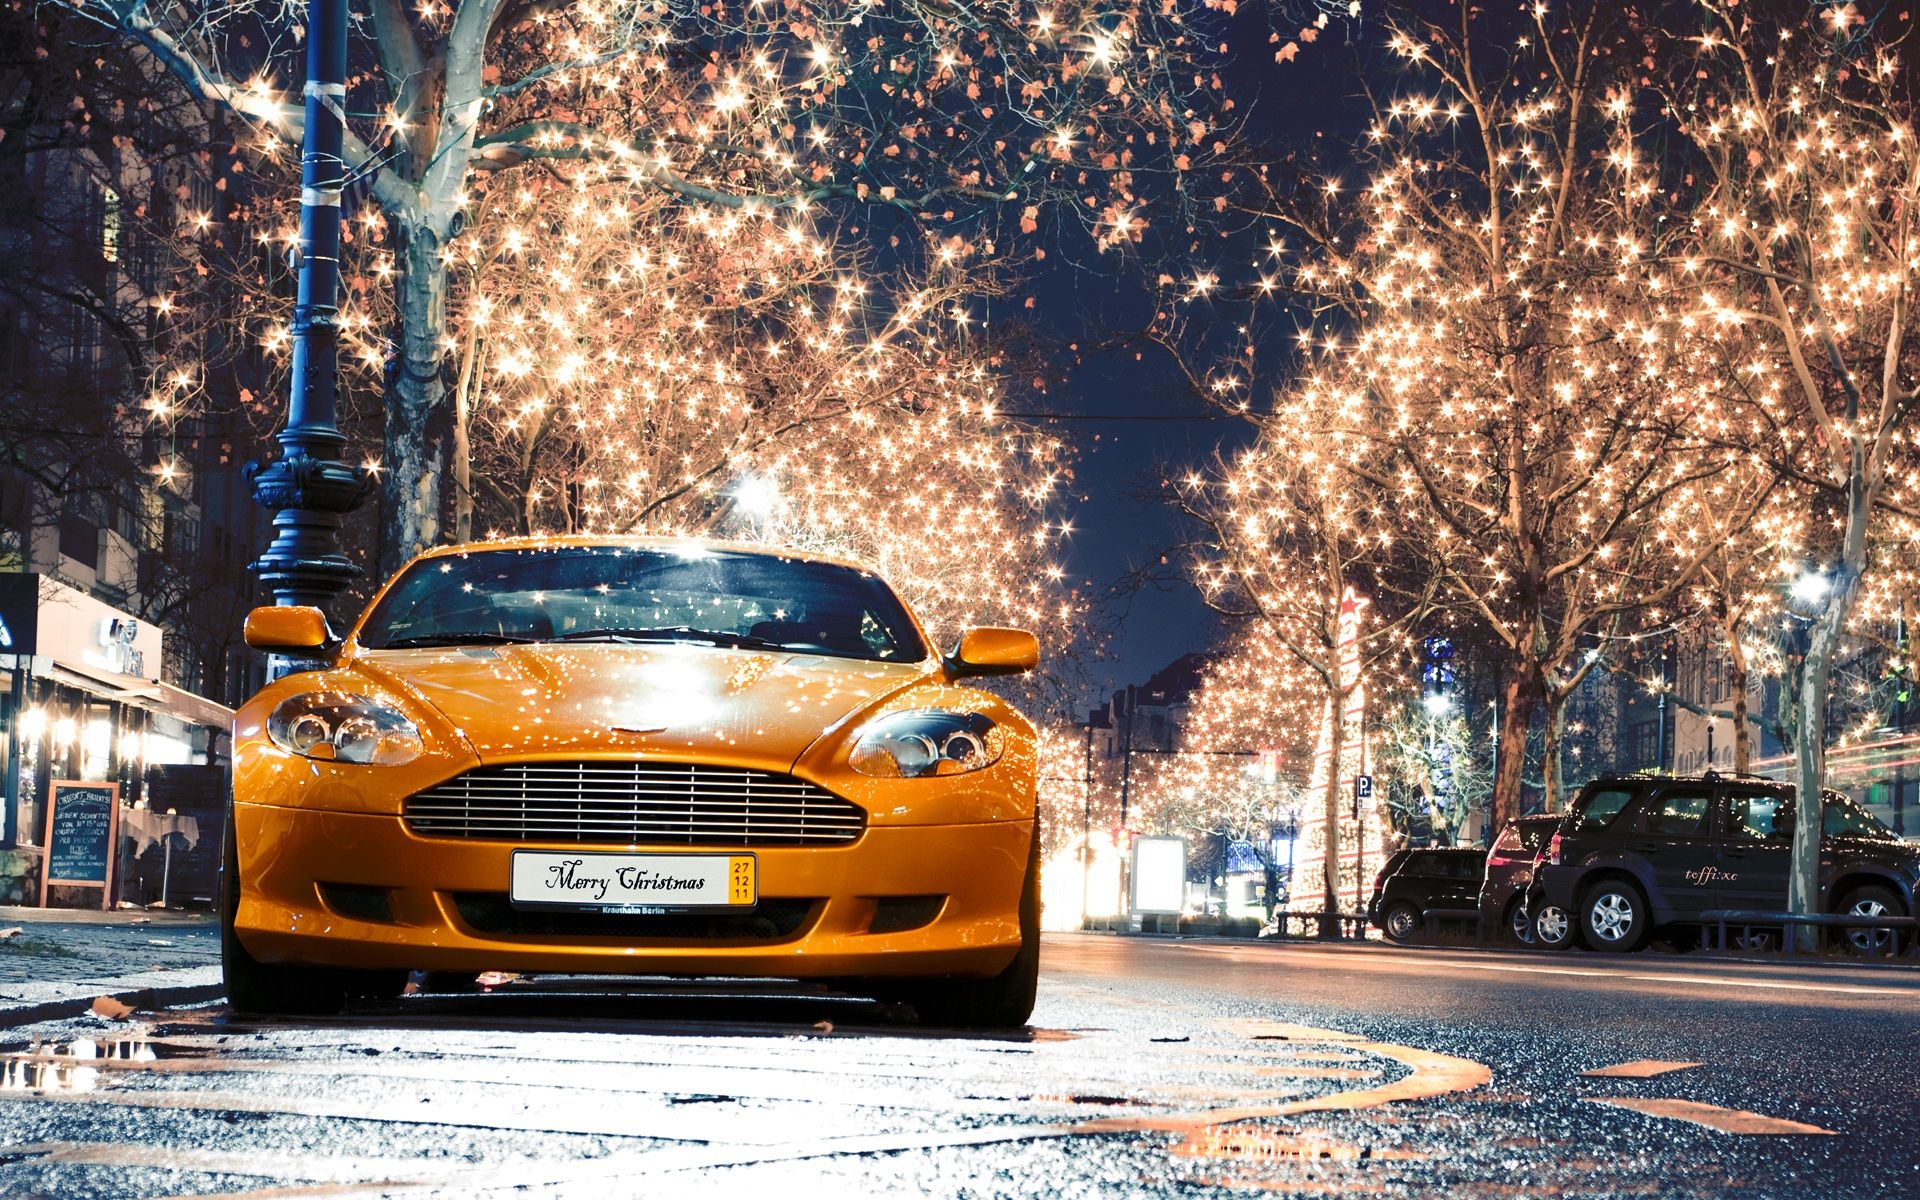 Christmas Cars Wallpapers Wallpaper Cave